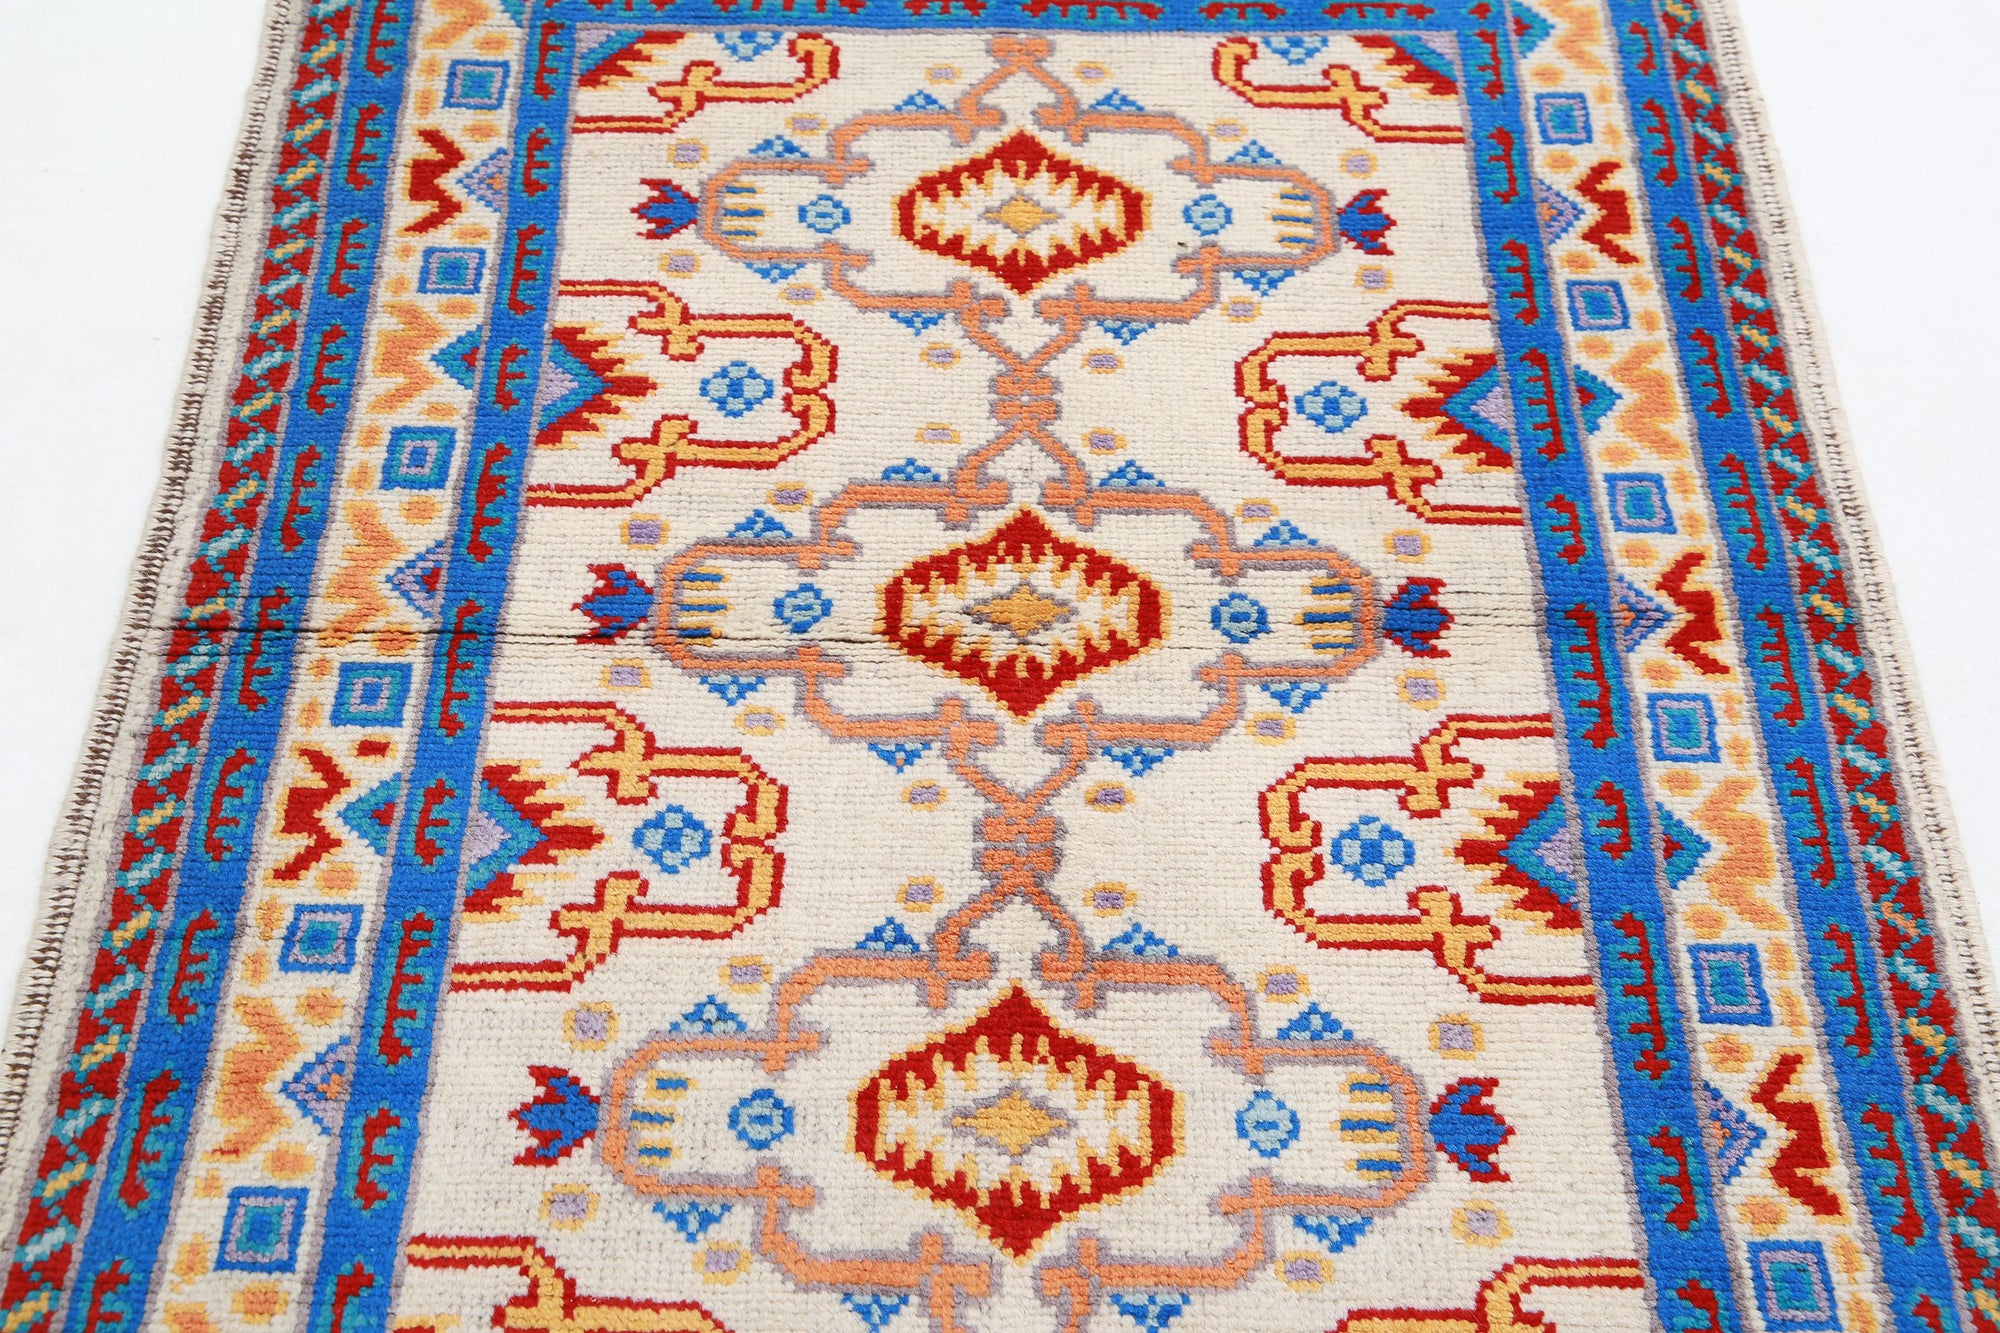 Revival-hand-knotted-qarghani-wool-rug-5014206-4.jpg